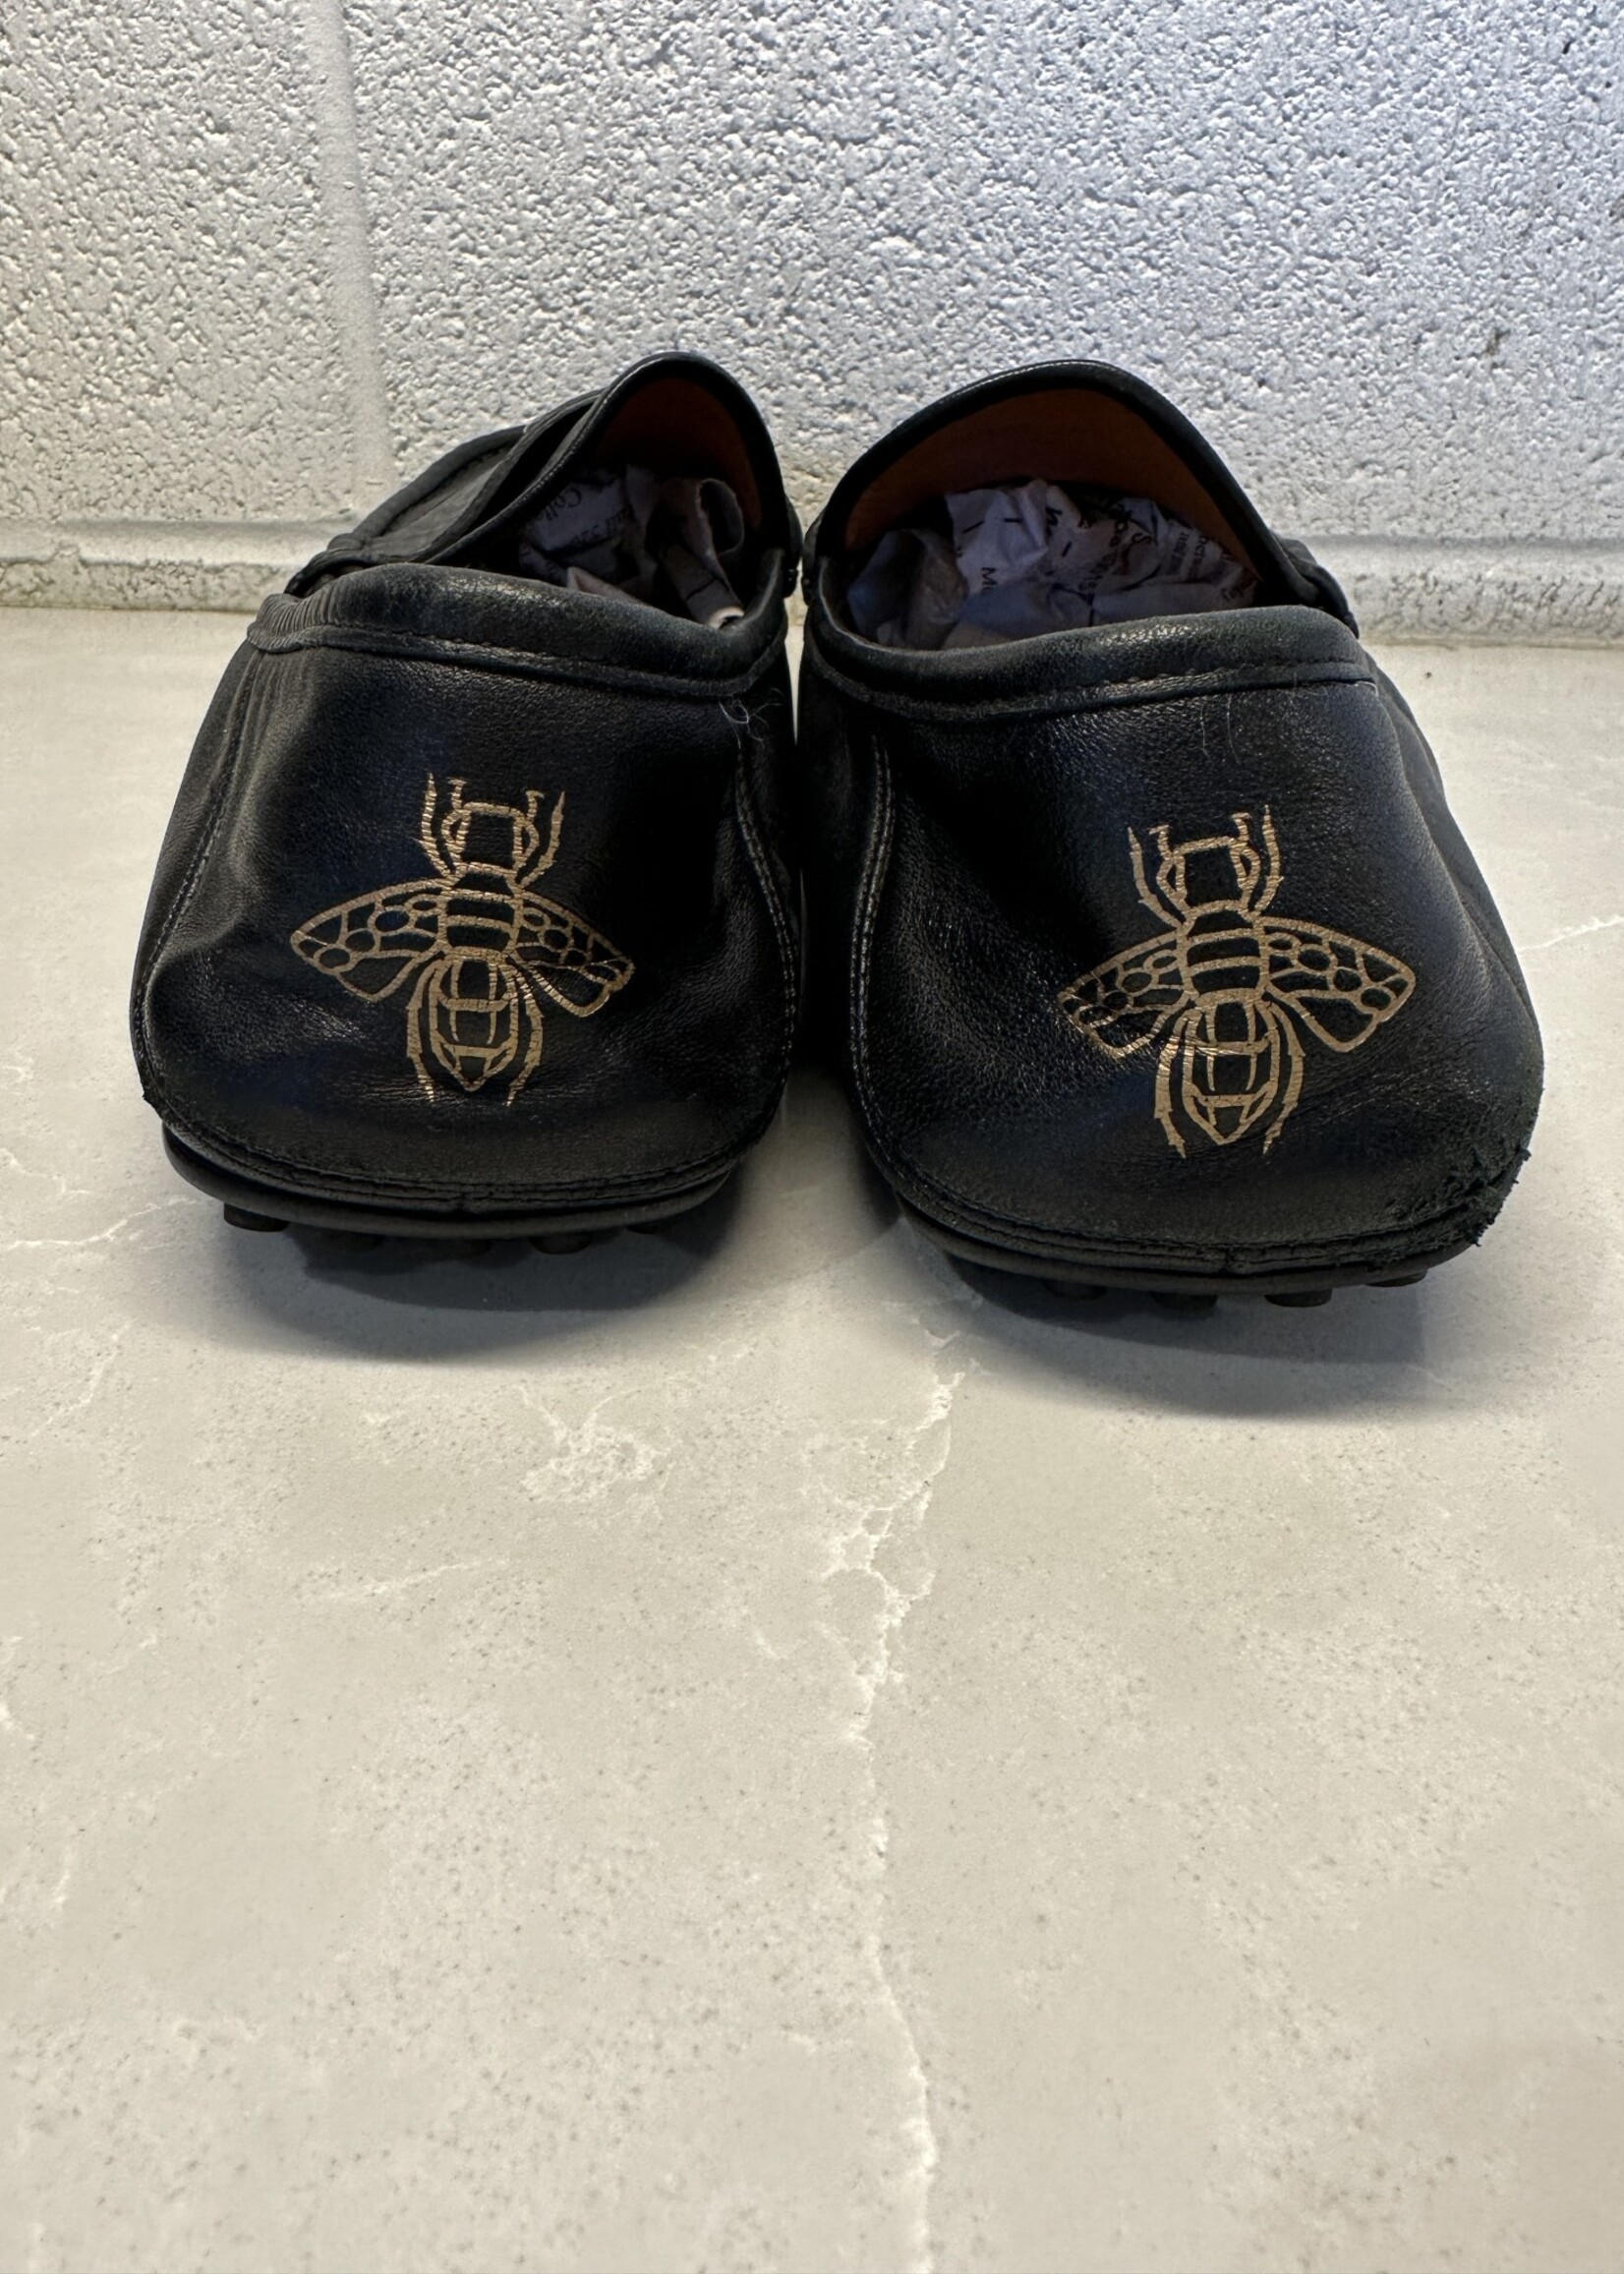 Gucci Black Loafers 10.5 AS IS